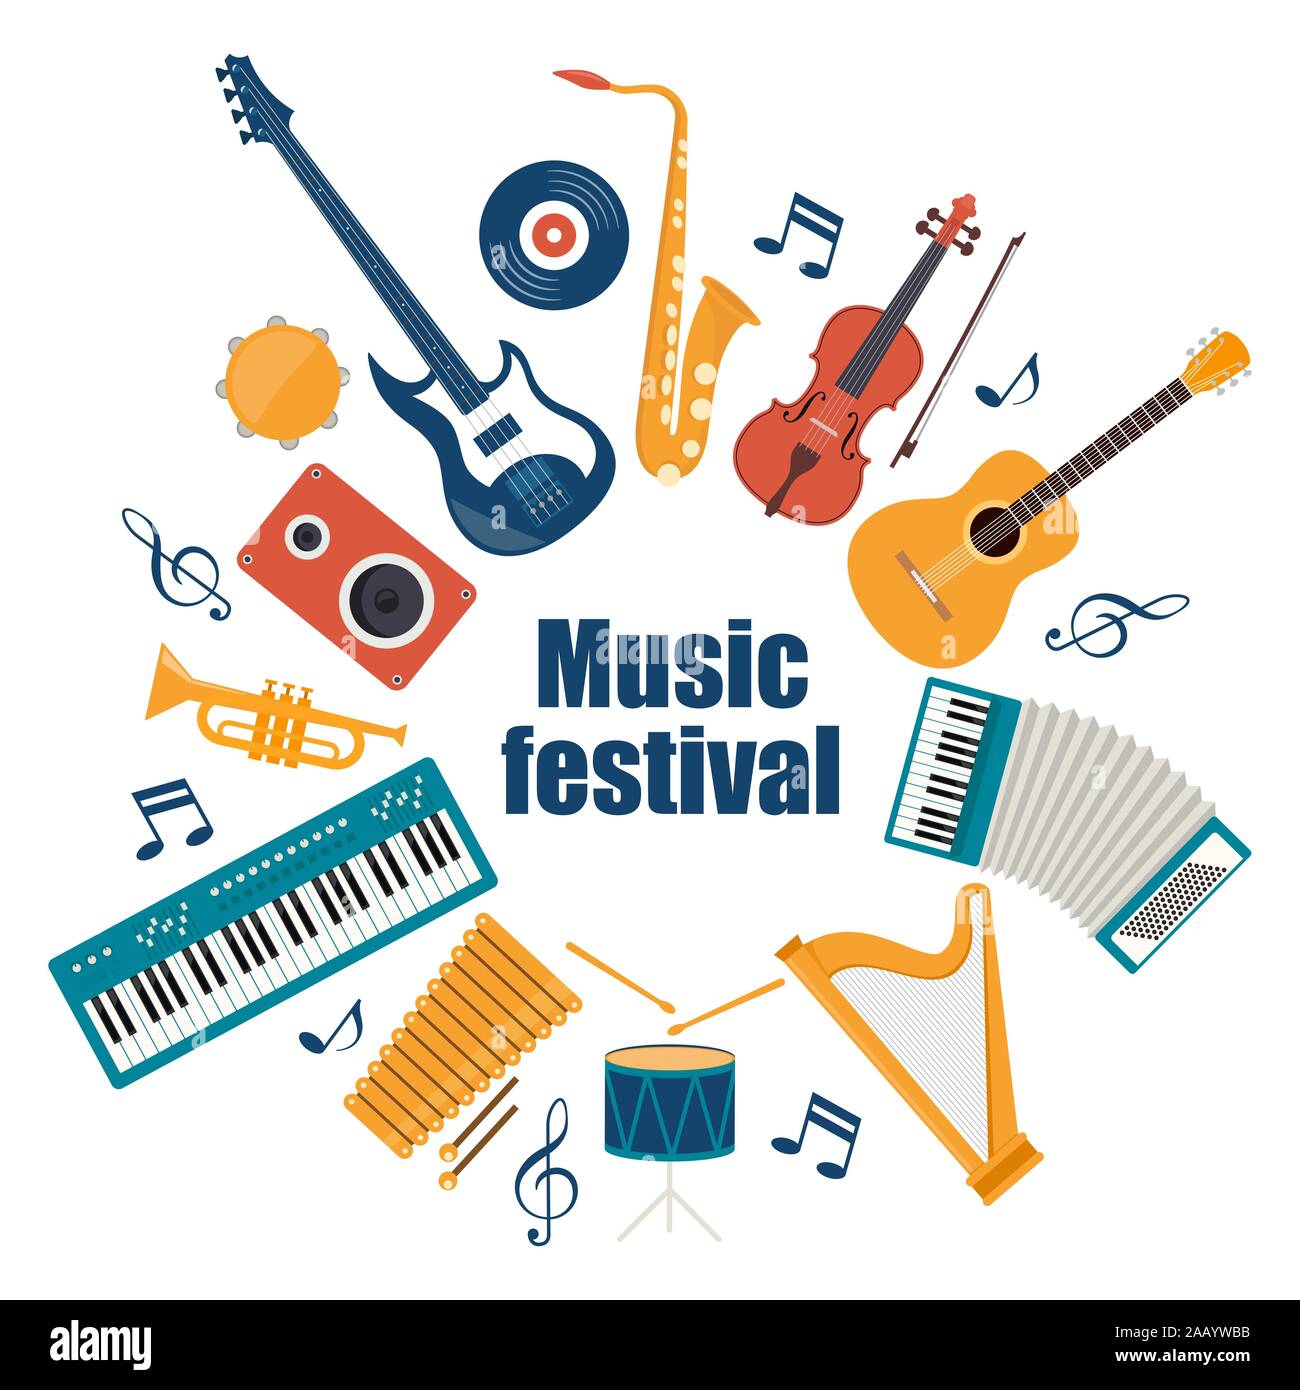 Musical instruments and vinyl record. Music festival invitation. Guitar, synthesizer, violin, cello, drum, cymbals, saxophone accordion tambourine tru Stock Vector